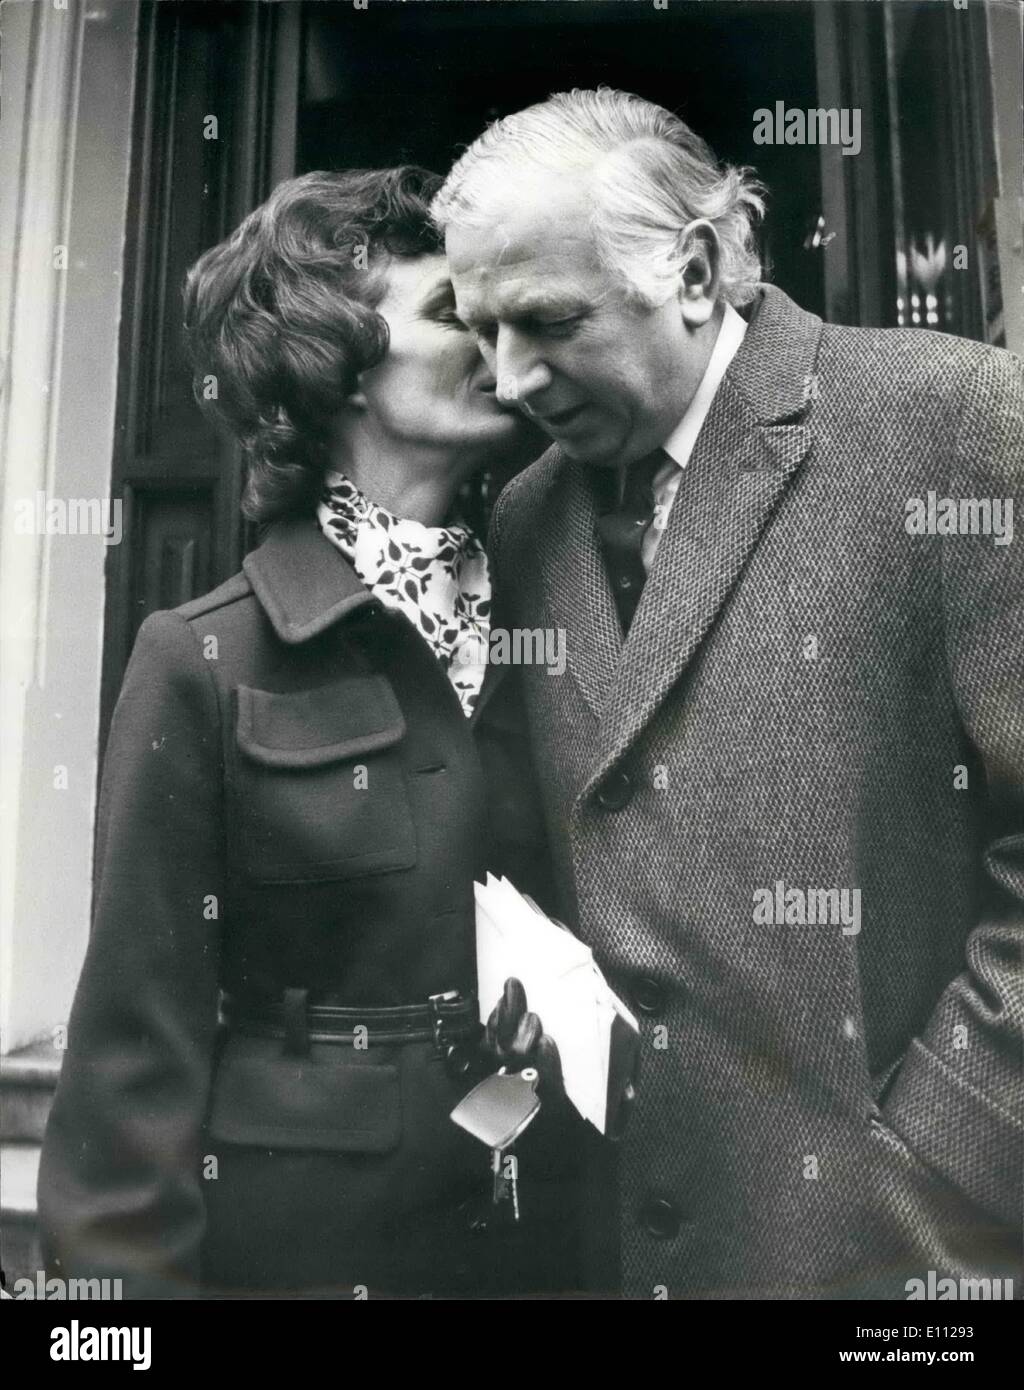 Feb. 02, 1975 - Scond Ballot For Tory Party Leadership: The second ballot for the leadership of the Conservative Party takes place today. Photo Shows Mr. James Prior, one of the candidates, gets a good luck kiss from his wife when he left his home in Victoria today. Stock Photo